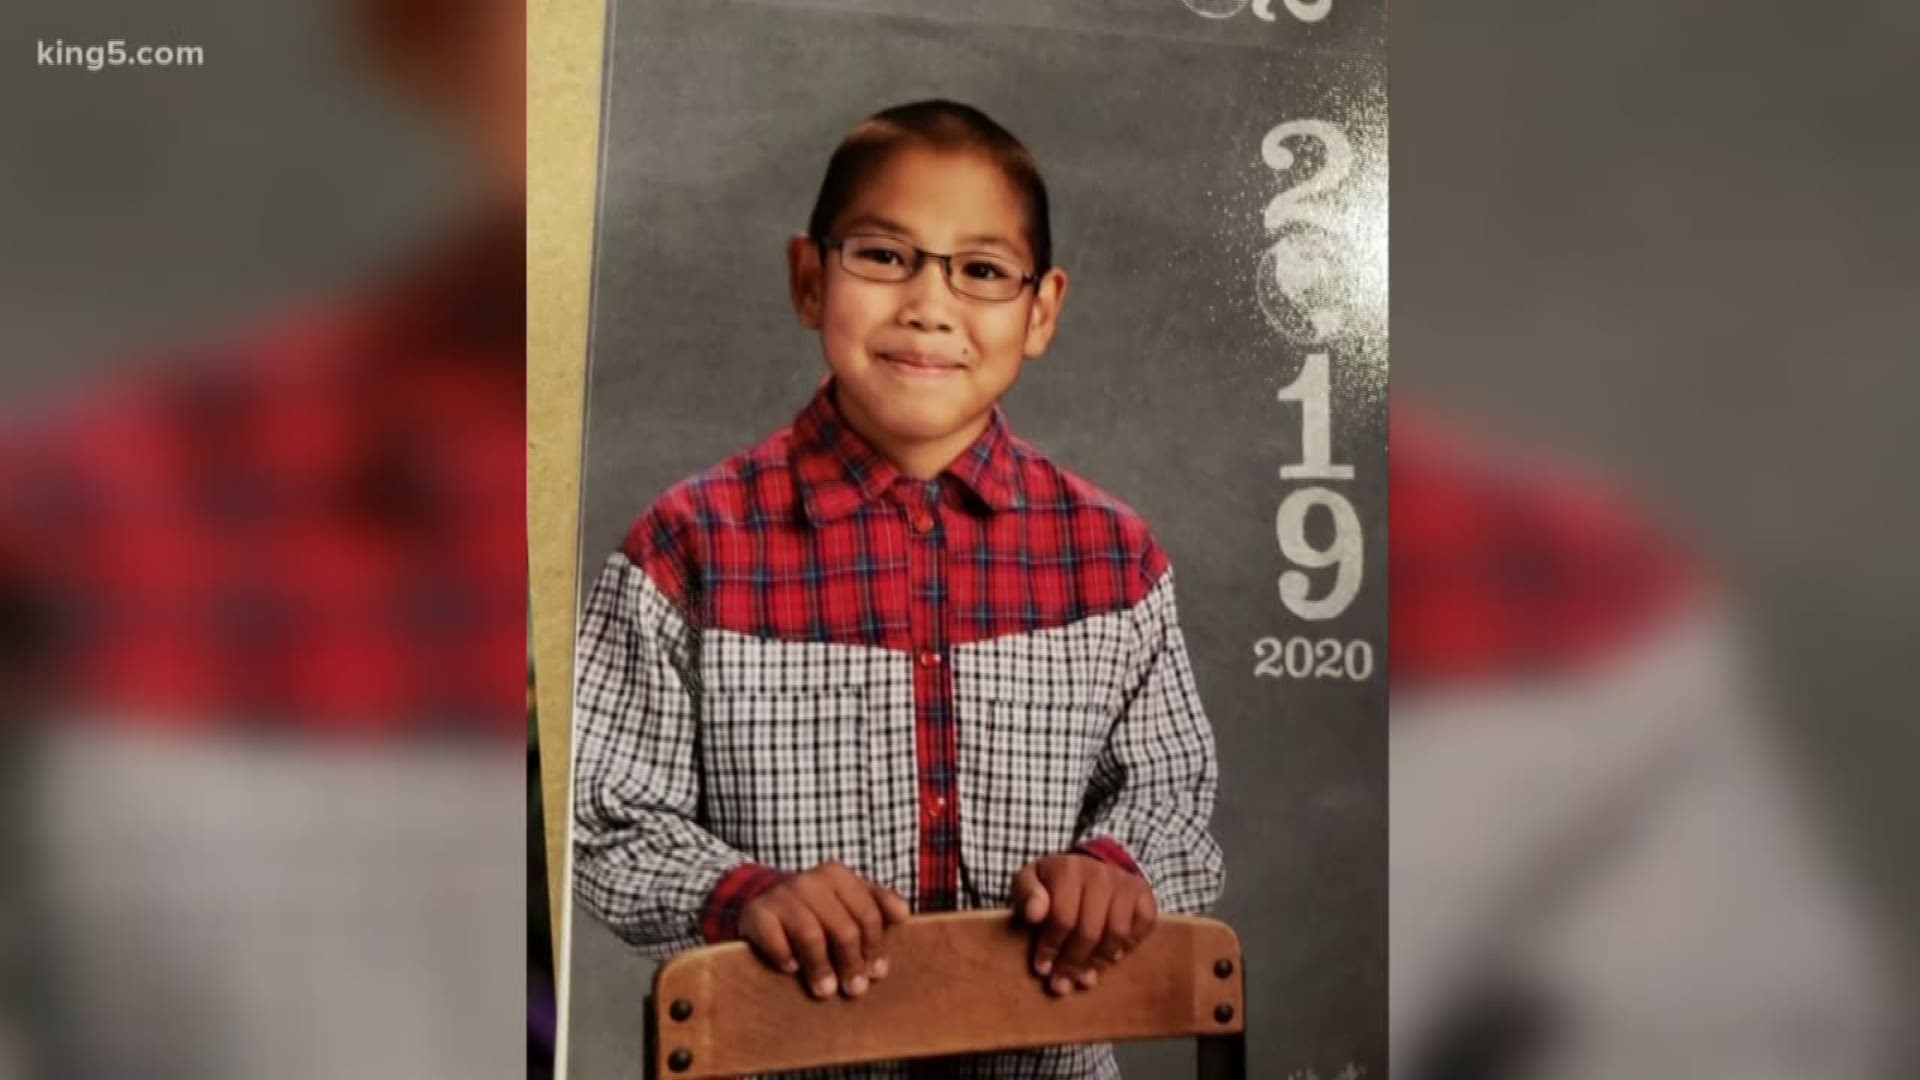 10-year-old Thomas Leinneweber is missing in a rural area of Belfair, Washington. The Mason County Sheriff's Office asks people stay away from the search area.